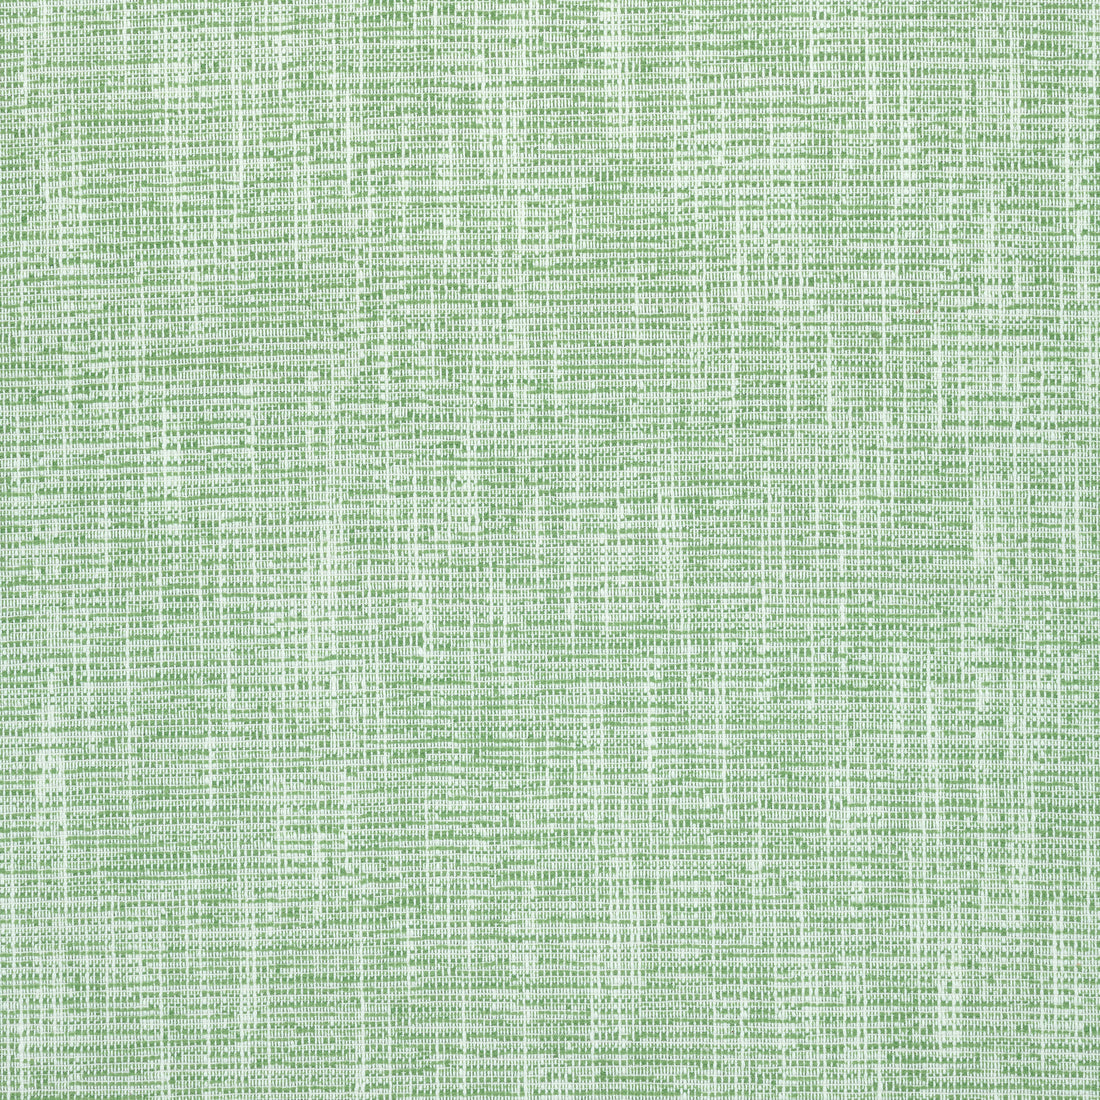 Piper fabric in kelly green color - pattern number W73446 - by Thibaut in the Landmark Textures collection